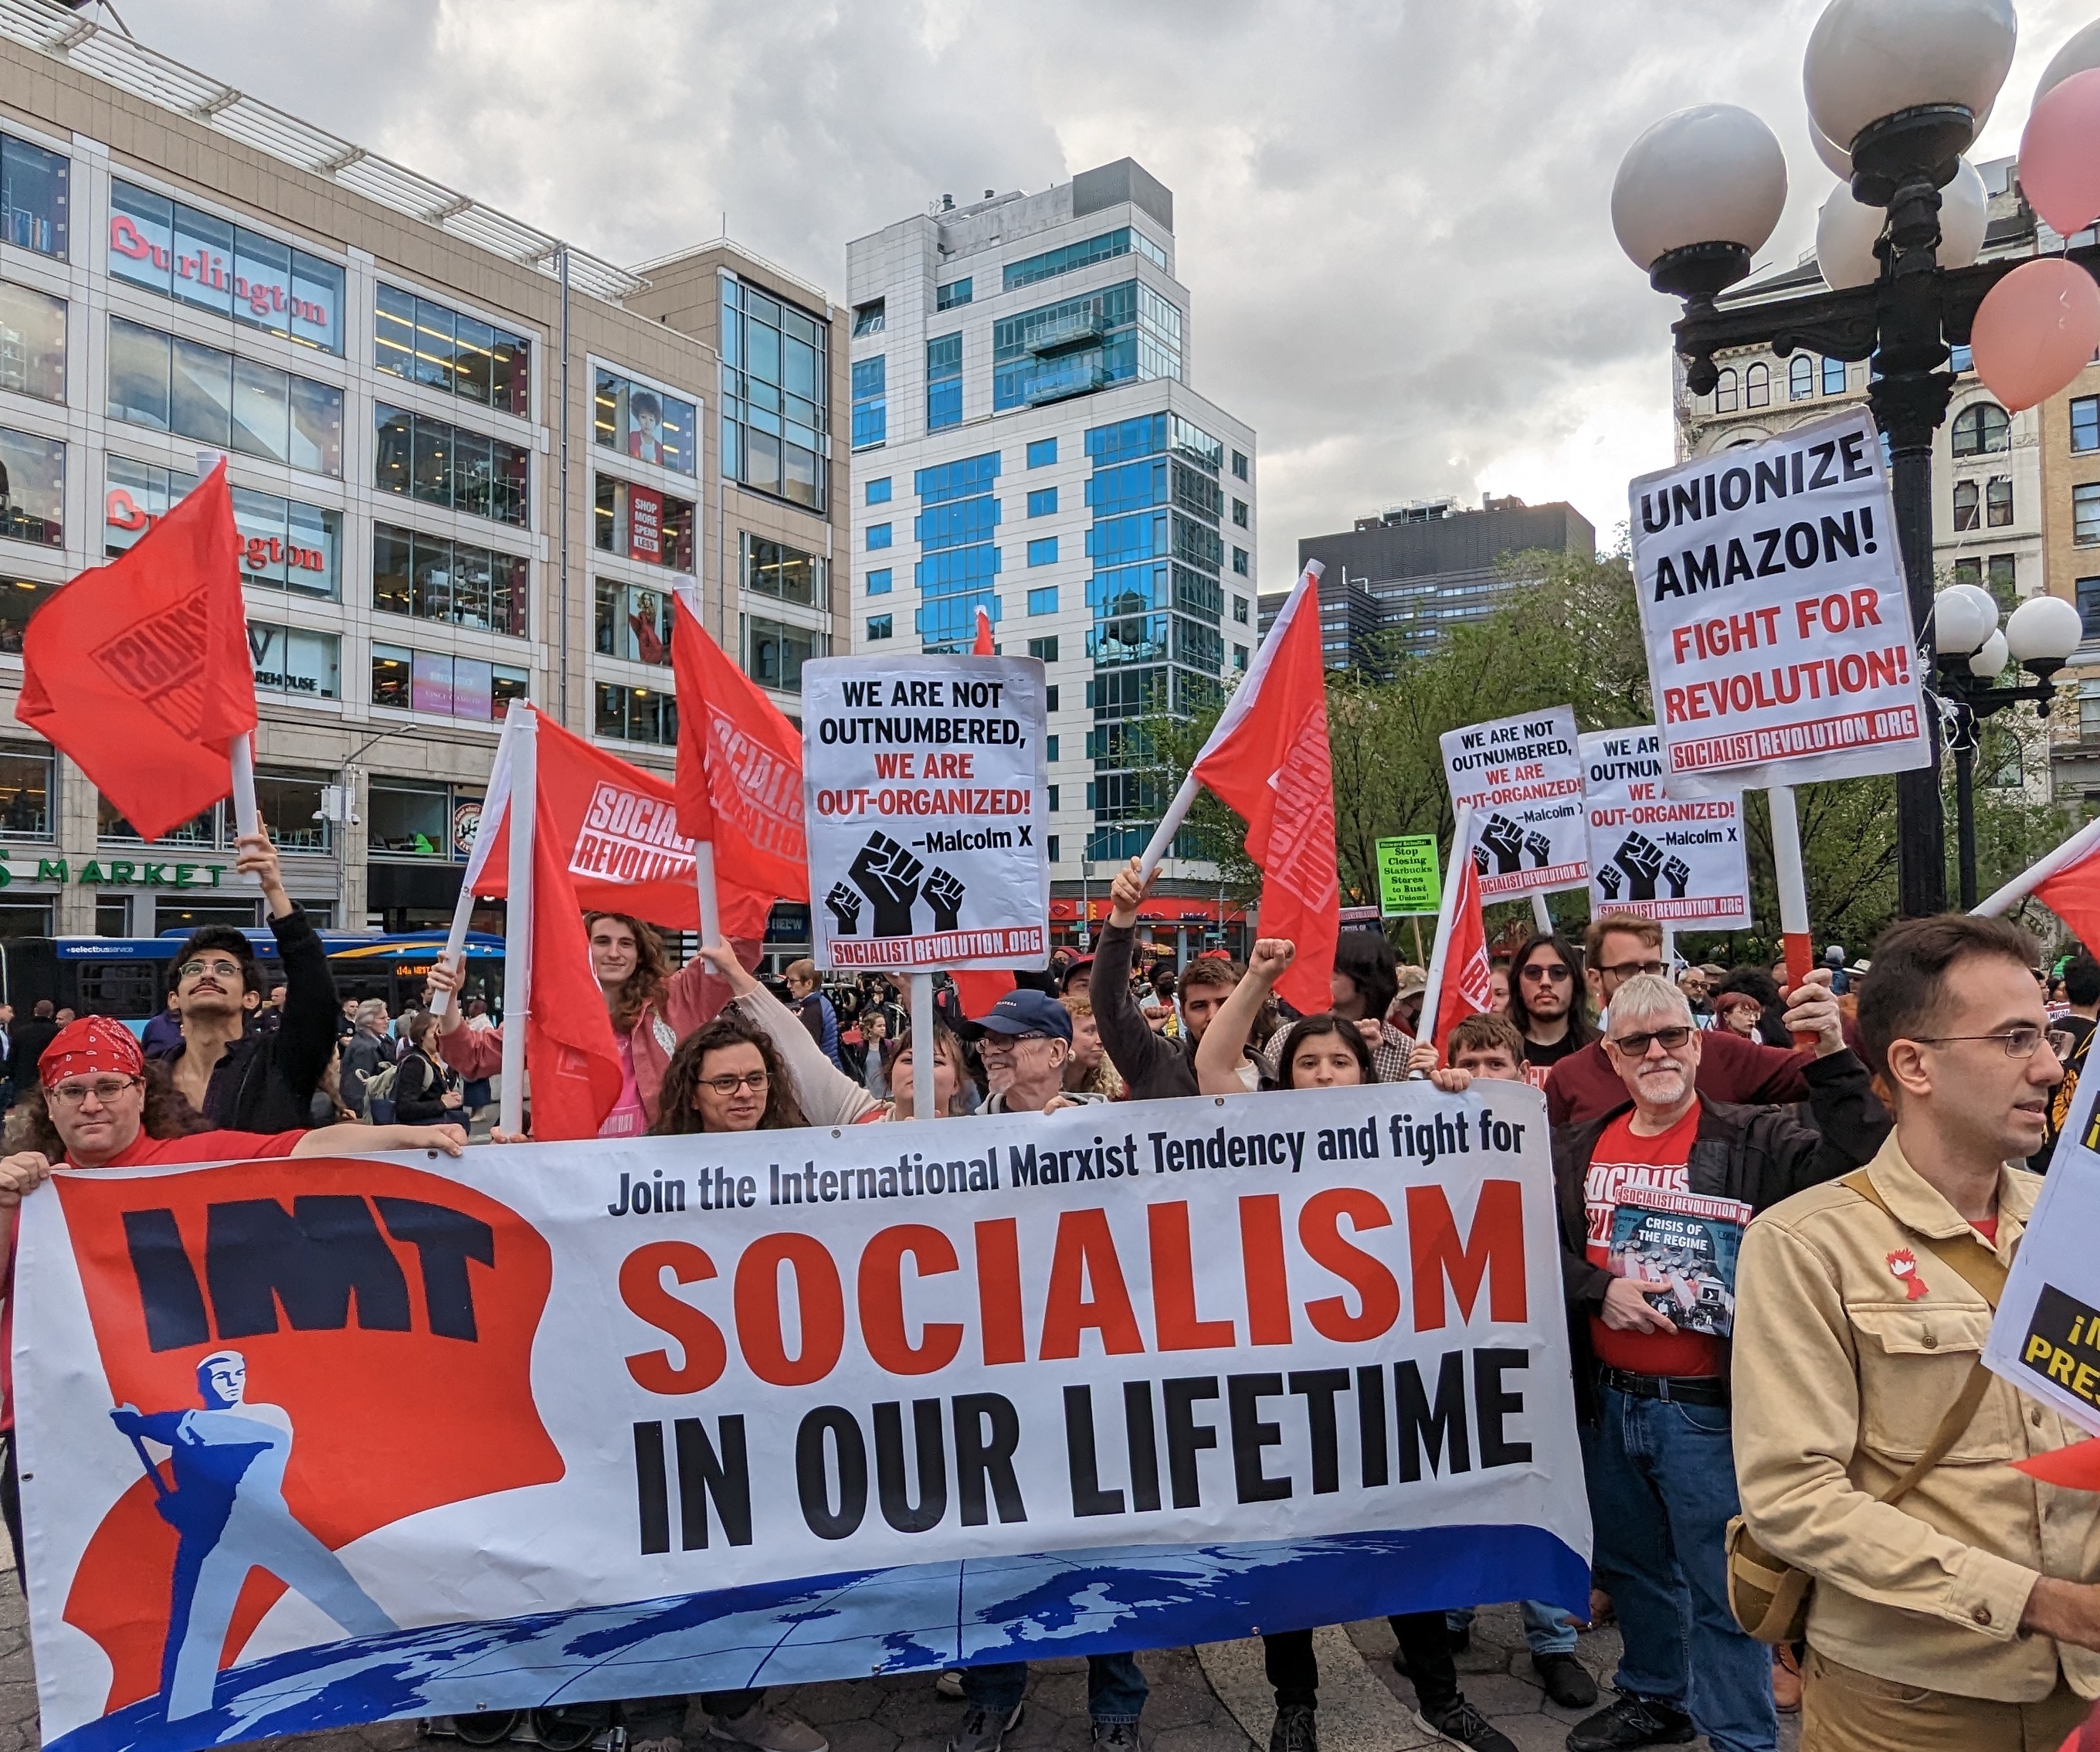 NYC May Day Group Banner Image Socialist Revolution